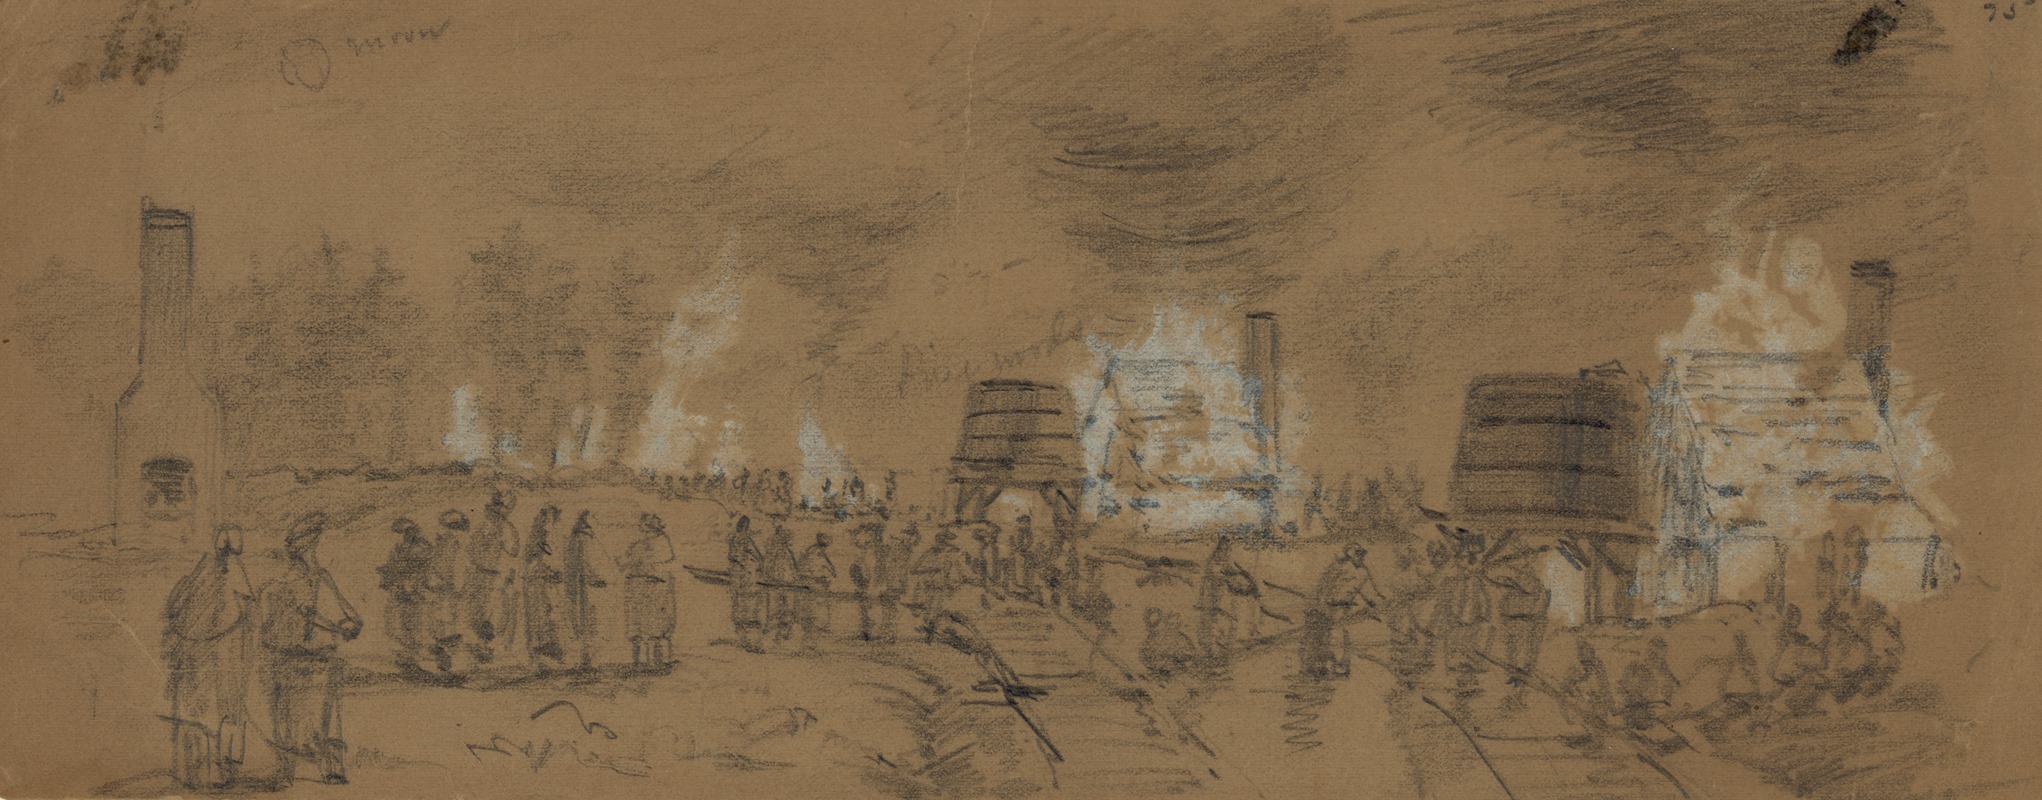 Alfred Rudolph Waud - Destruction of Water Tanks & Engines & engine houses for pumping water into them at Jarrets Station